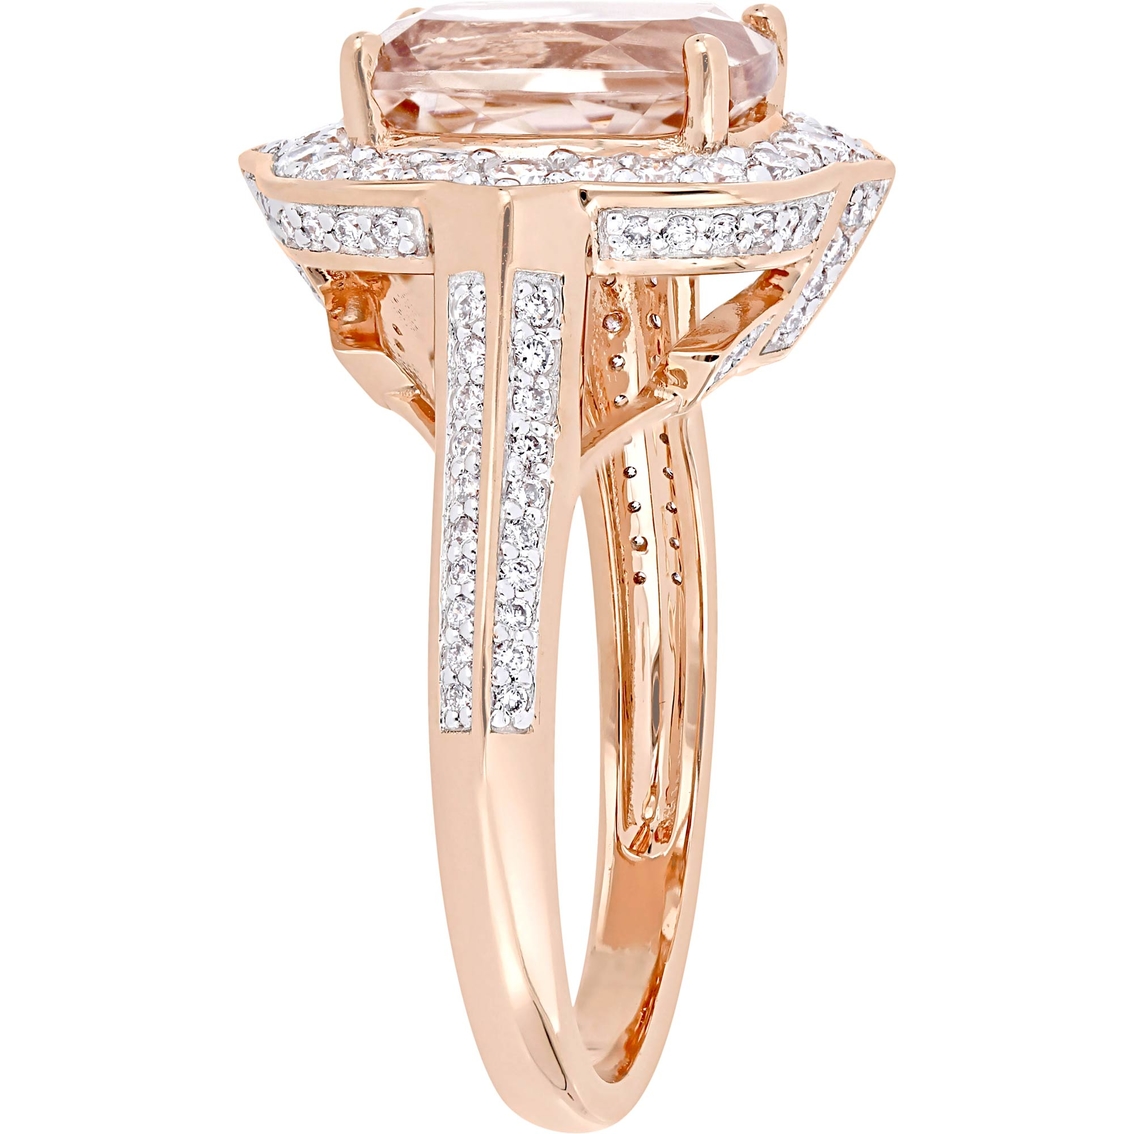 Sofia B. Morganite and 5/8 CTW Diamond Vintage Halo Ring in 14K Rose Gold - Image 2 of 4